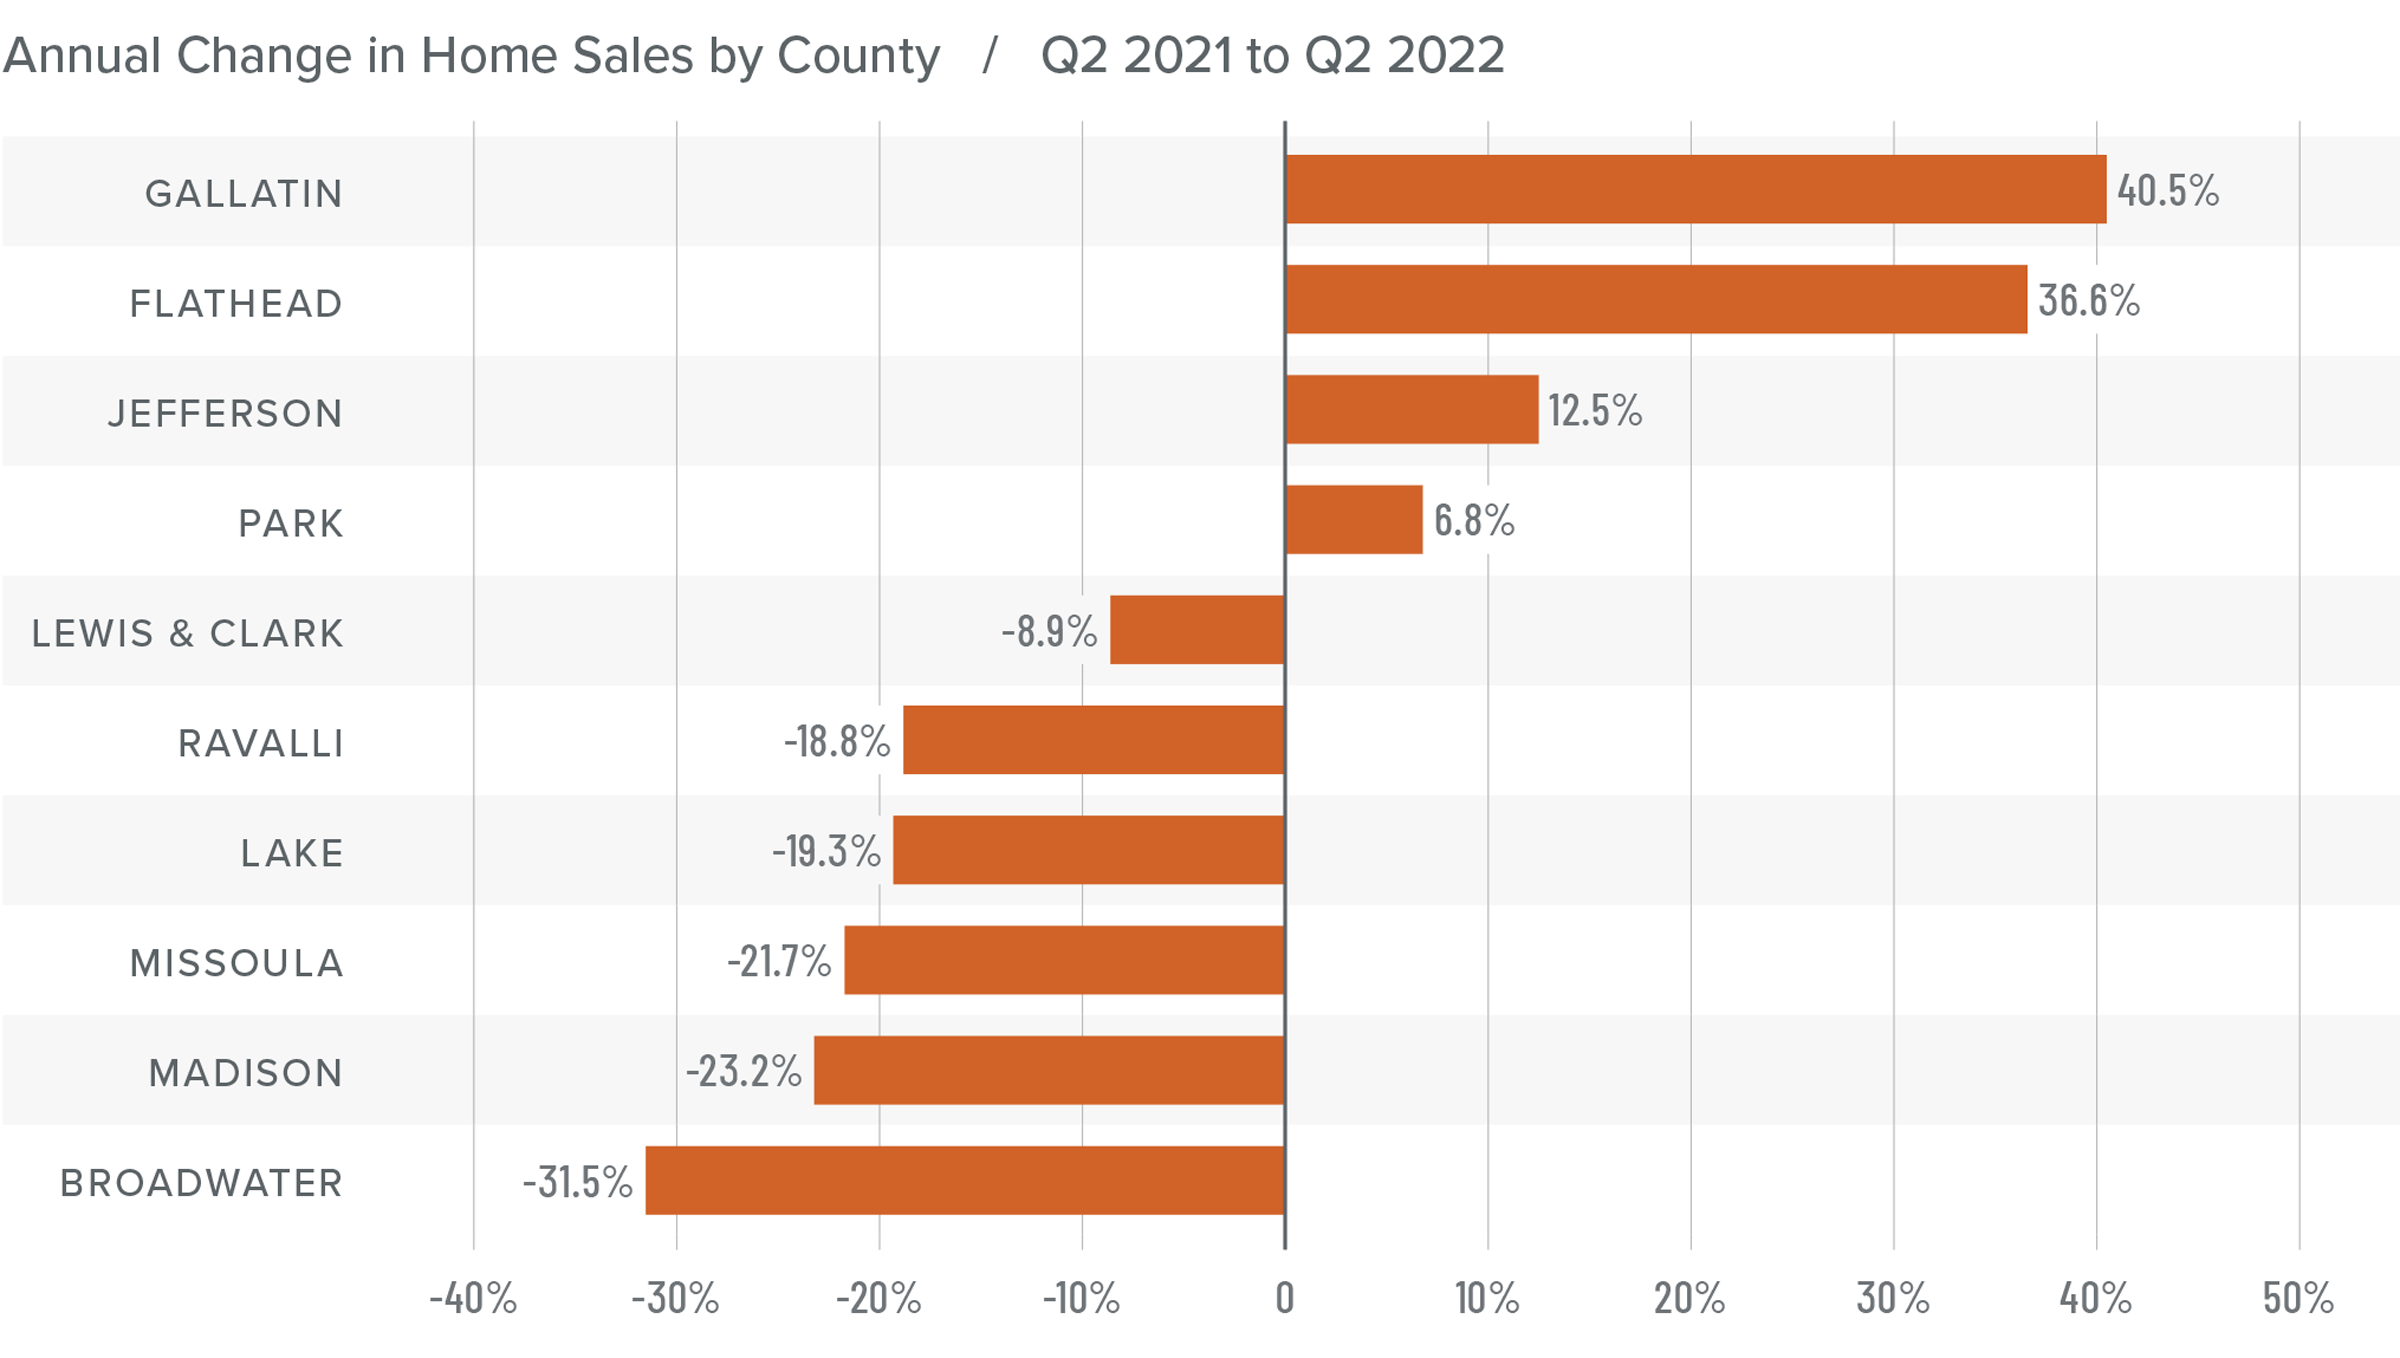 A bar graph showing the annual change in home sales for various counties in Montana from Q2 2021 to Q2 2022. Gallatin County came out on top with a 40.5% change, followed by Flathead at 36.6%, Jefferson at 12.5%, Park at 6.8%, Lewis & Clark at -8.9%, Ravalli at -18.8%, Lake at -19.3%, Missoula at -21.7%, Madison at -23.2%, and Broadwater -31.5%.